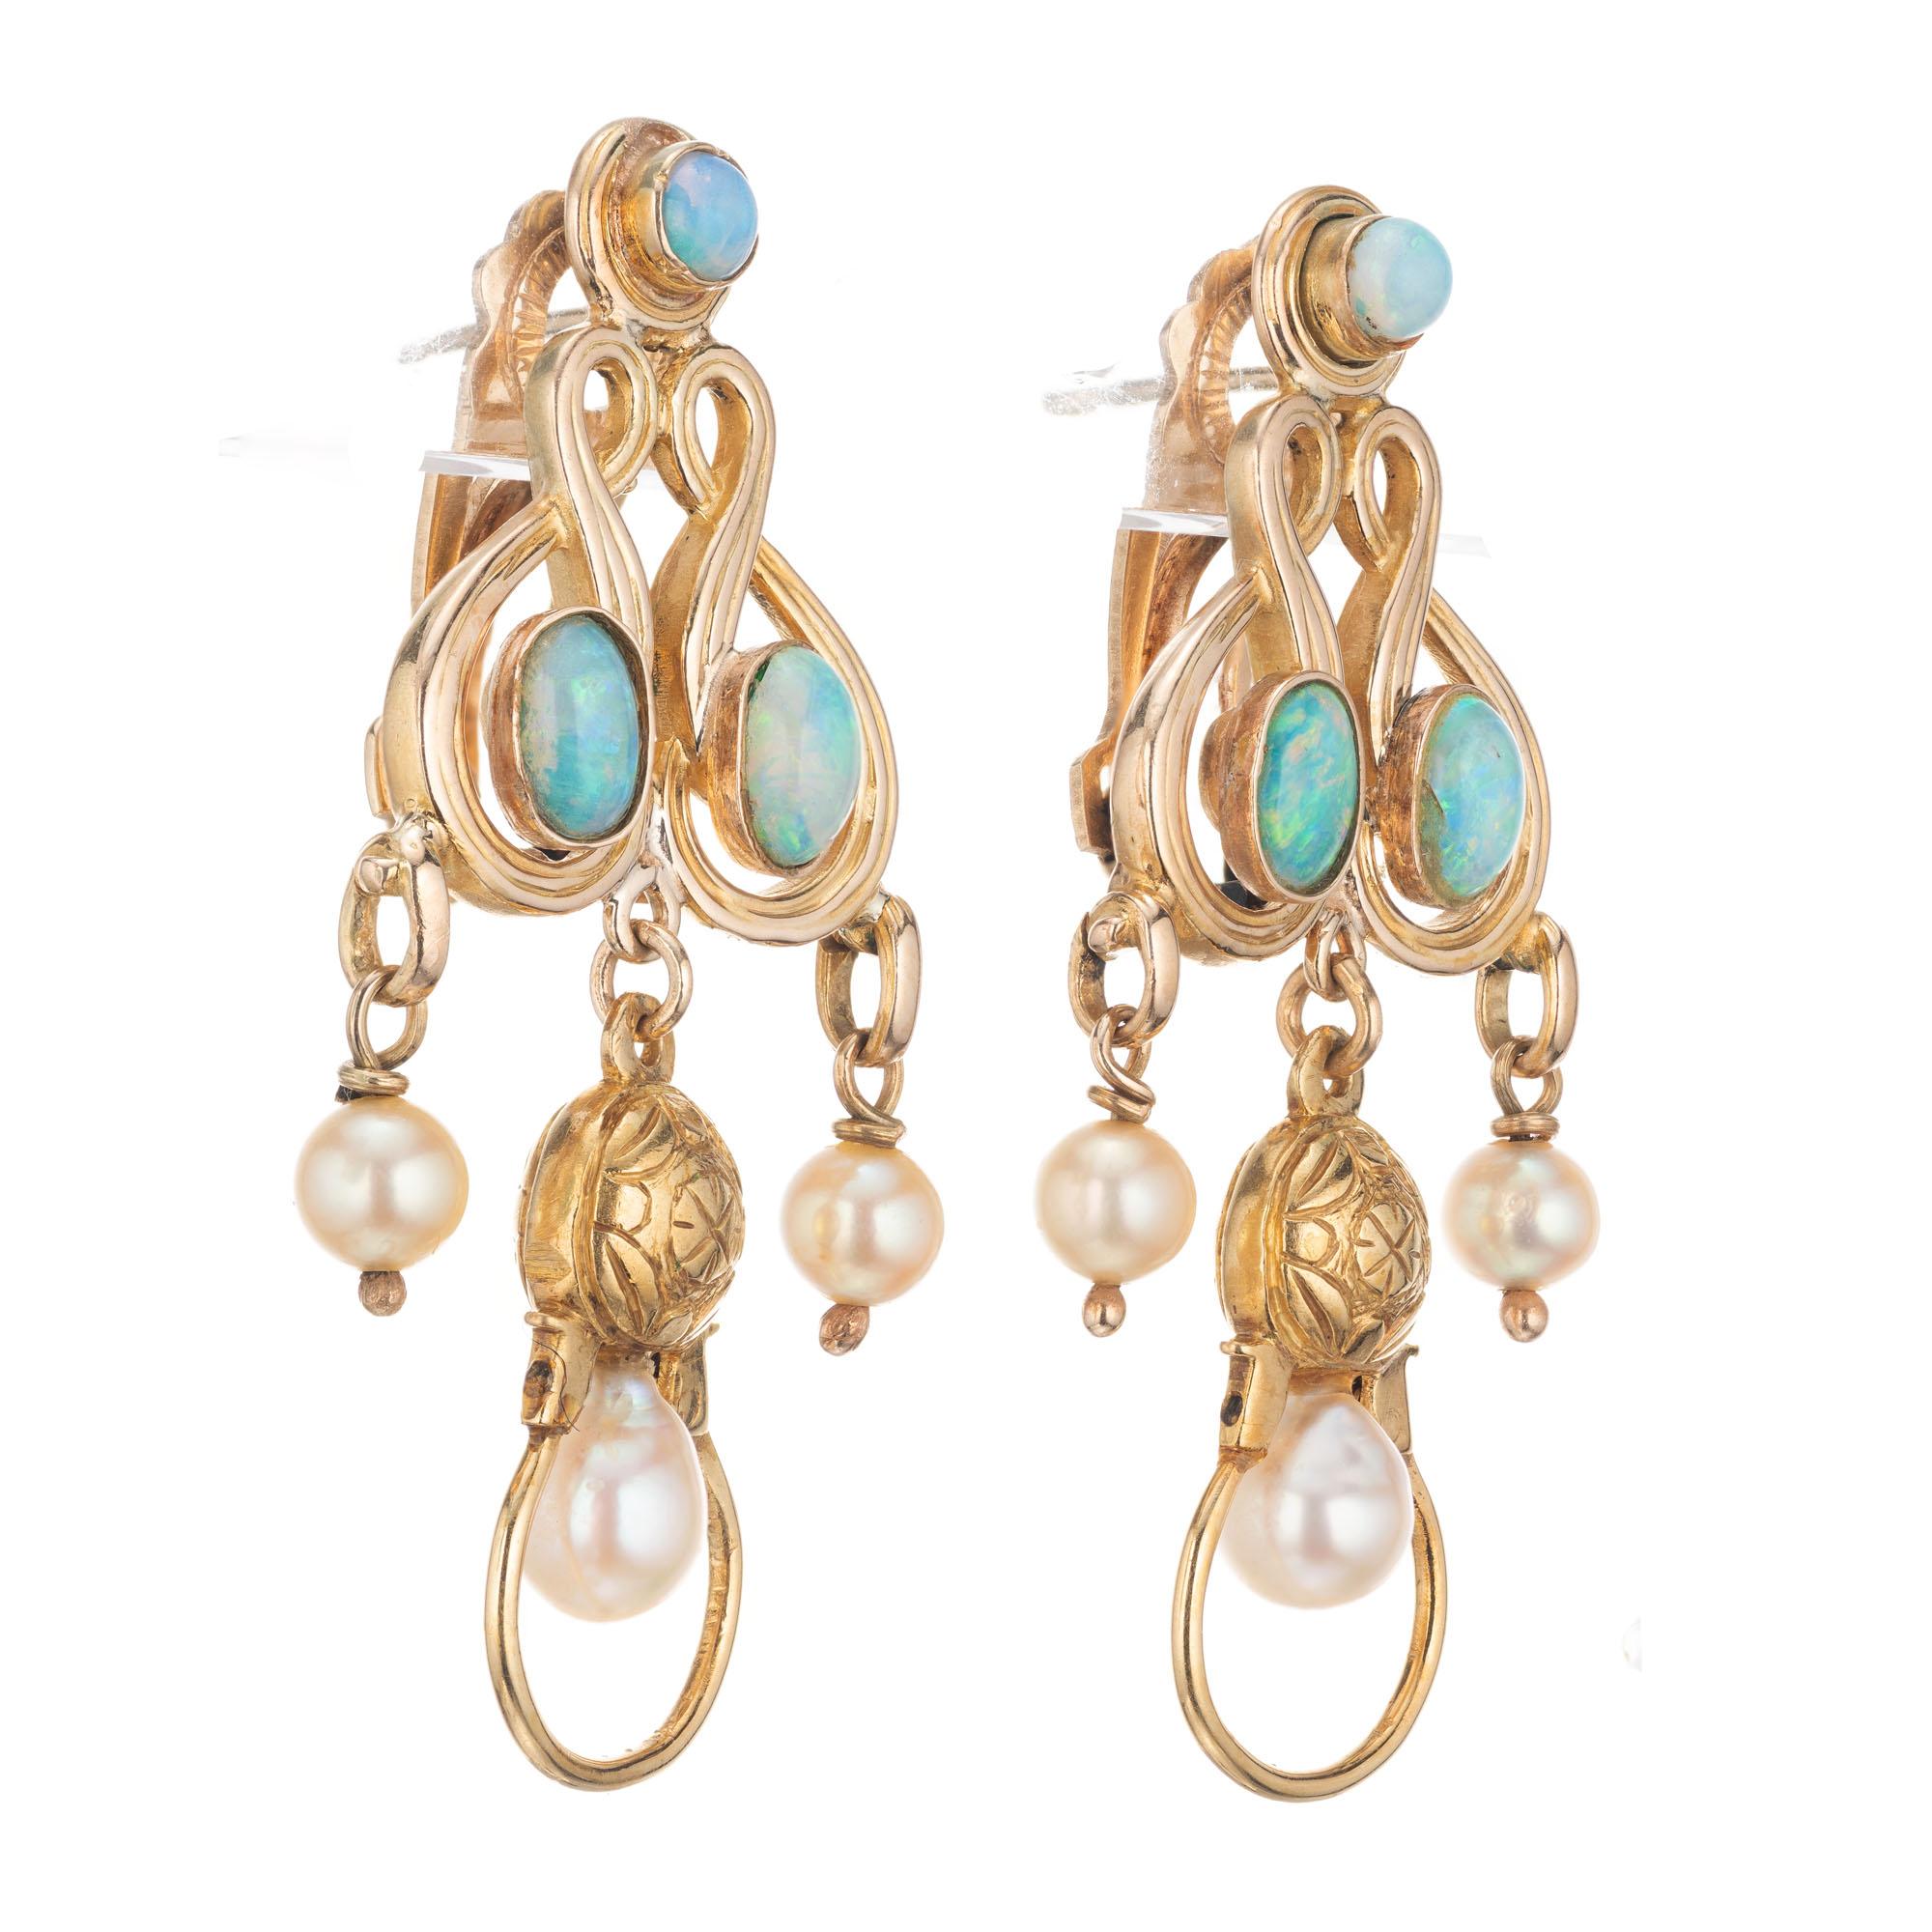 Clip post opal cultured pearl 14k yellow gold dangle chandelier earrings. Circa 1960's. Art Nouveau inspired design 

4 oval cabochon bluish green opals
2 round cabochon greenish blue opals
6 white/crème cultured pearls
18k Yellow Gold 
Tested: